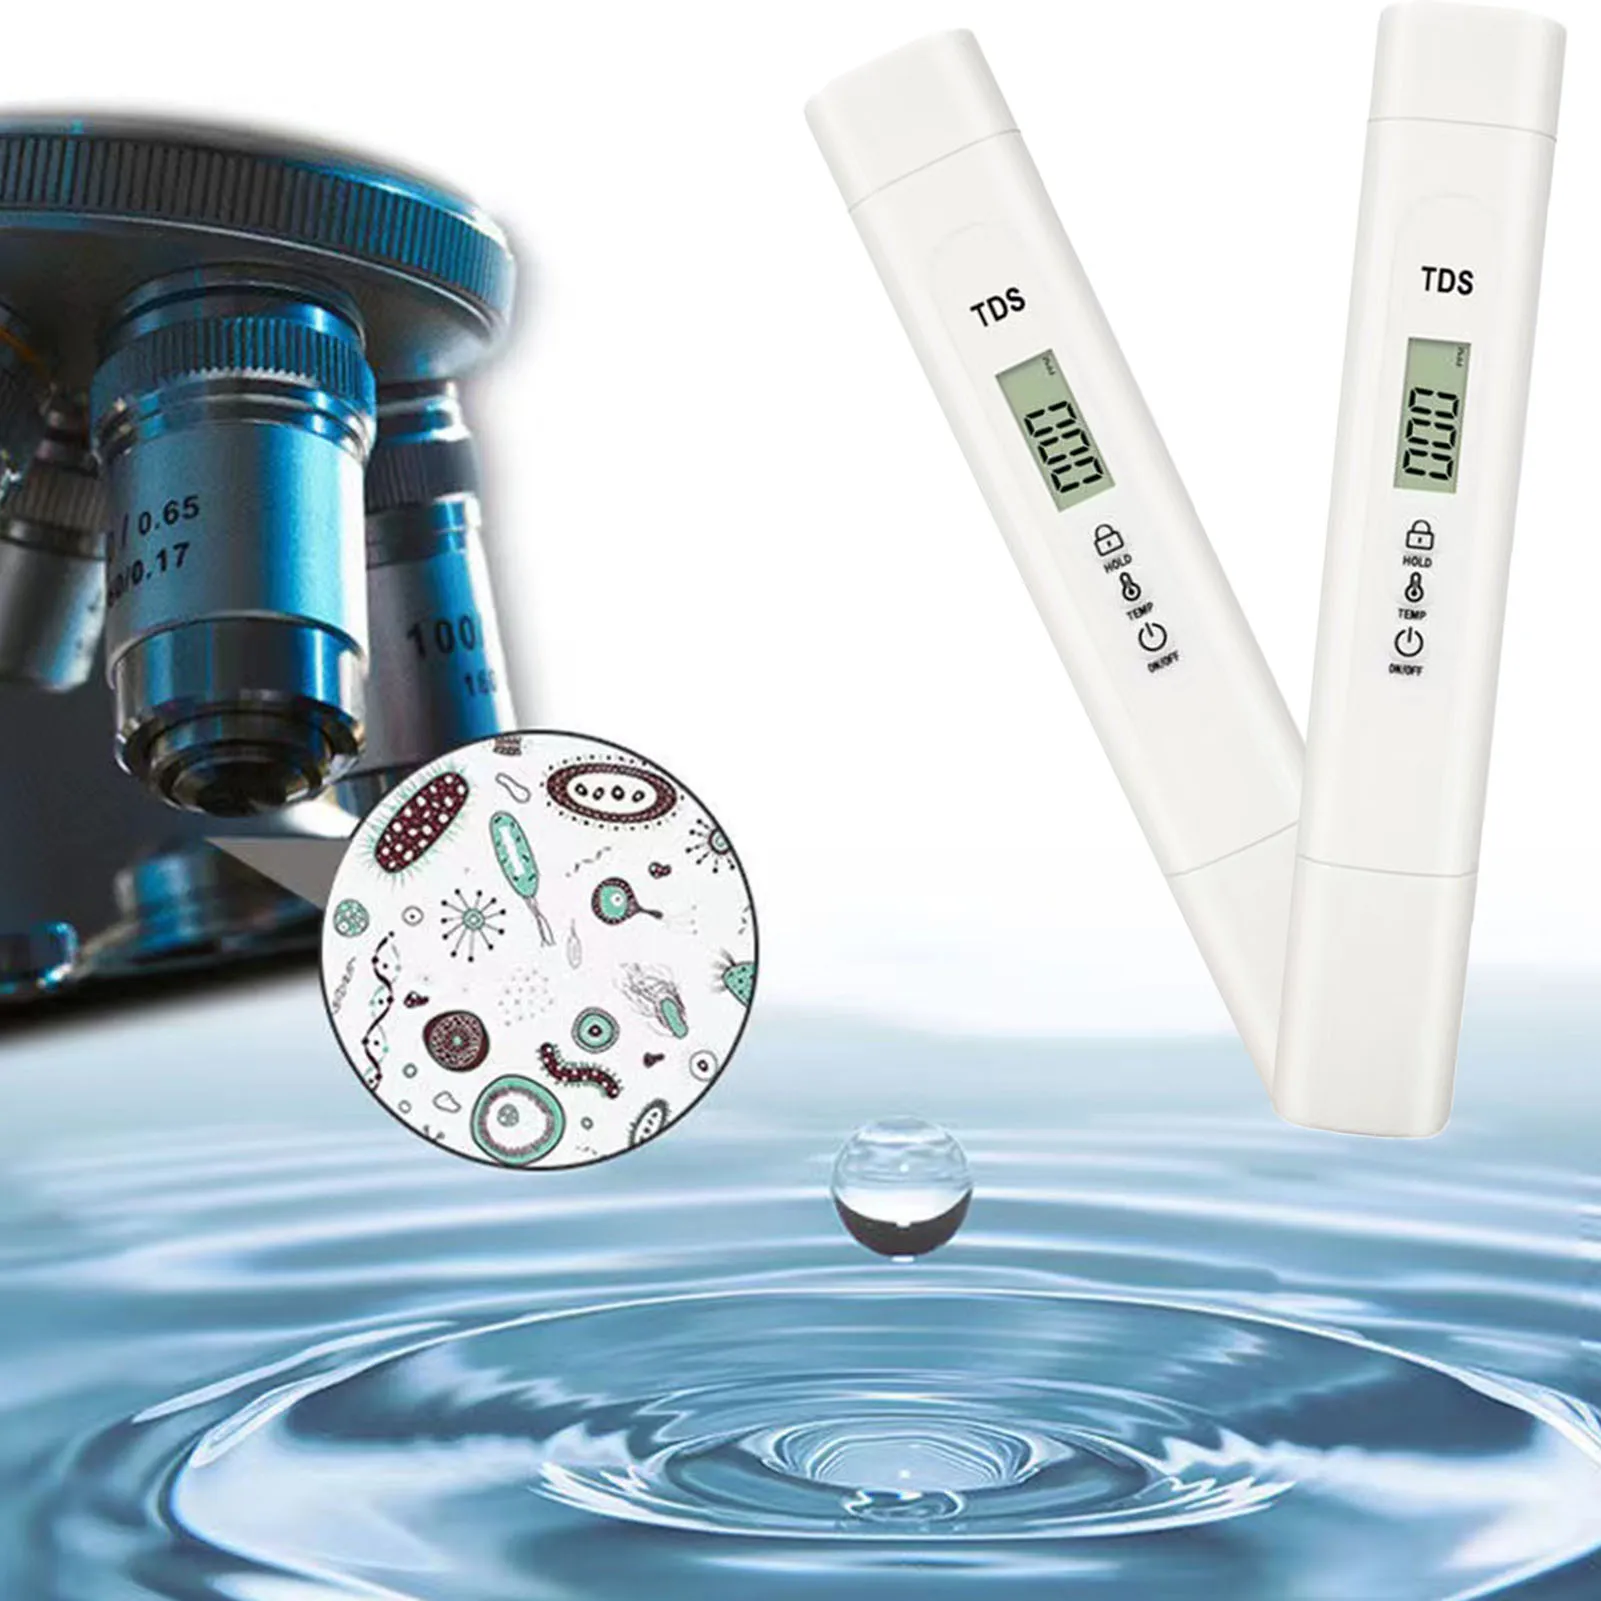 

TDS Meter Digital Water Tester 3 In 1 Water Quality Tester For Drinking Water 0-9990 Ppm Meter Accurate For Drinking Water